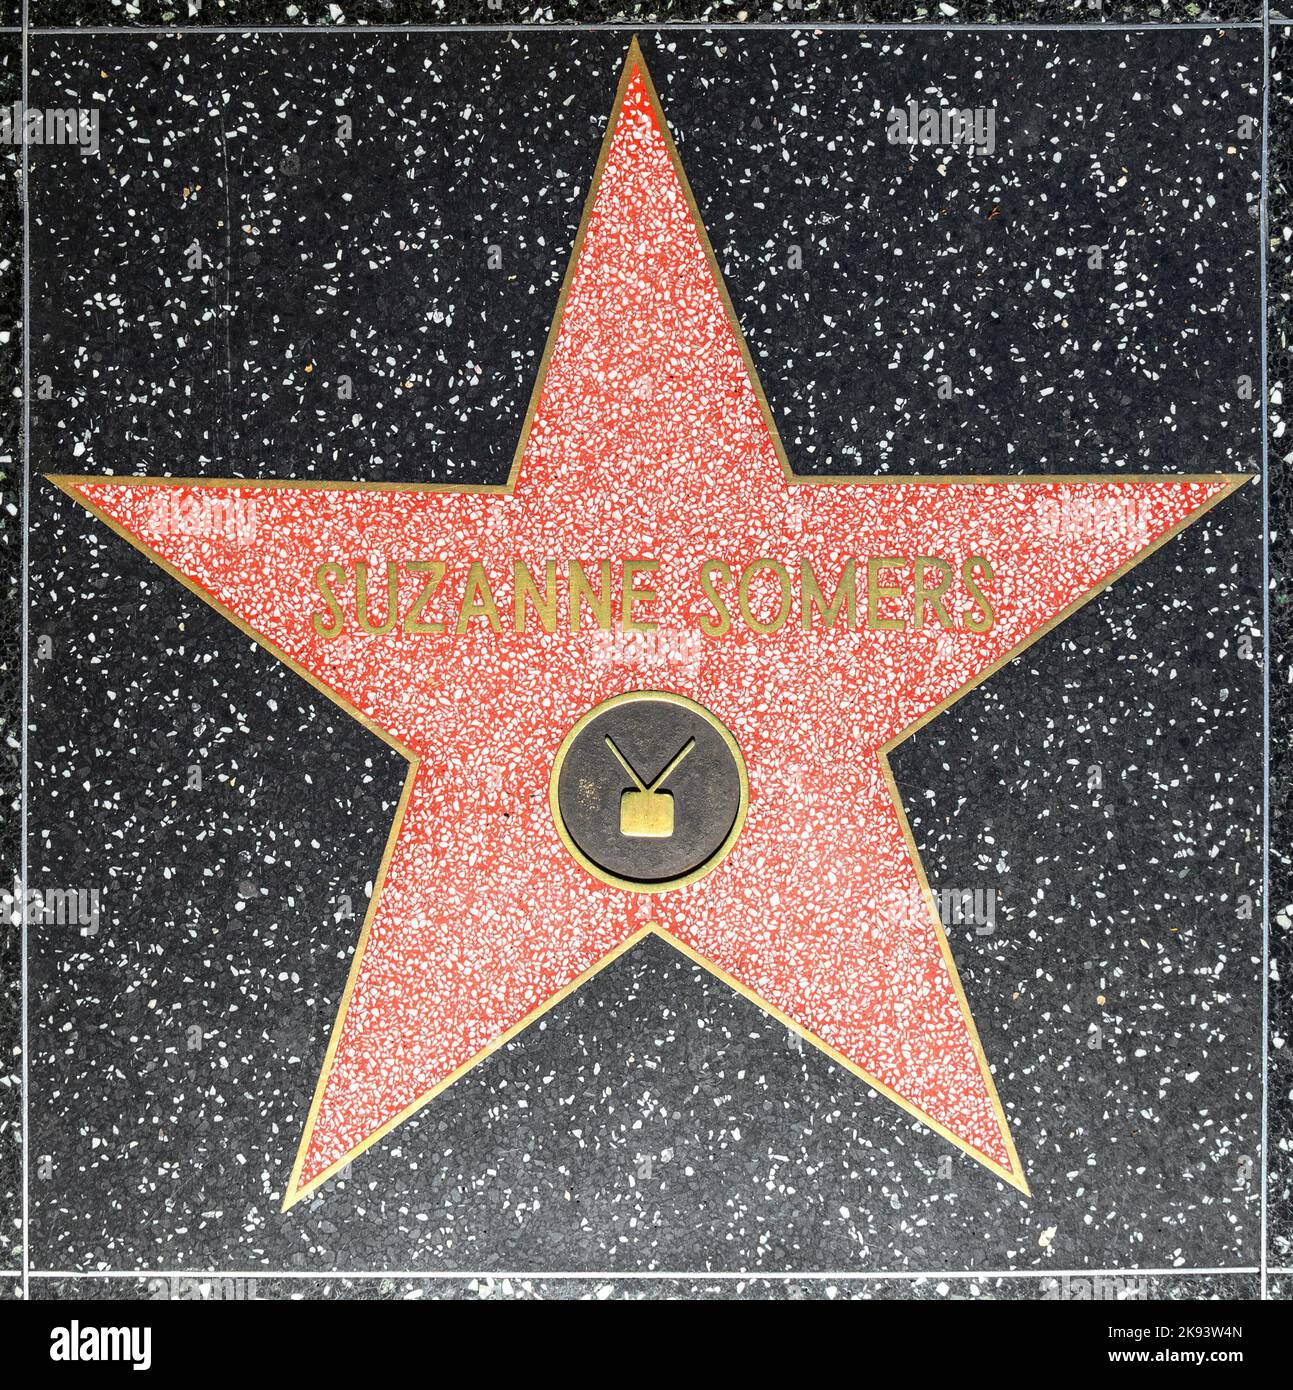 HOLLYWOOD - JUNE 26: Suzanne Somers star on Hollywood Walk of Fame on June 26, 2012 in Hollywood, California. This star is located on Hollywood Blvd. Stock Photo